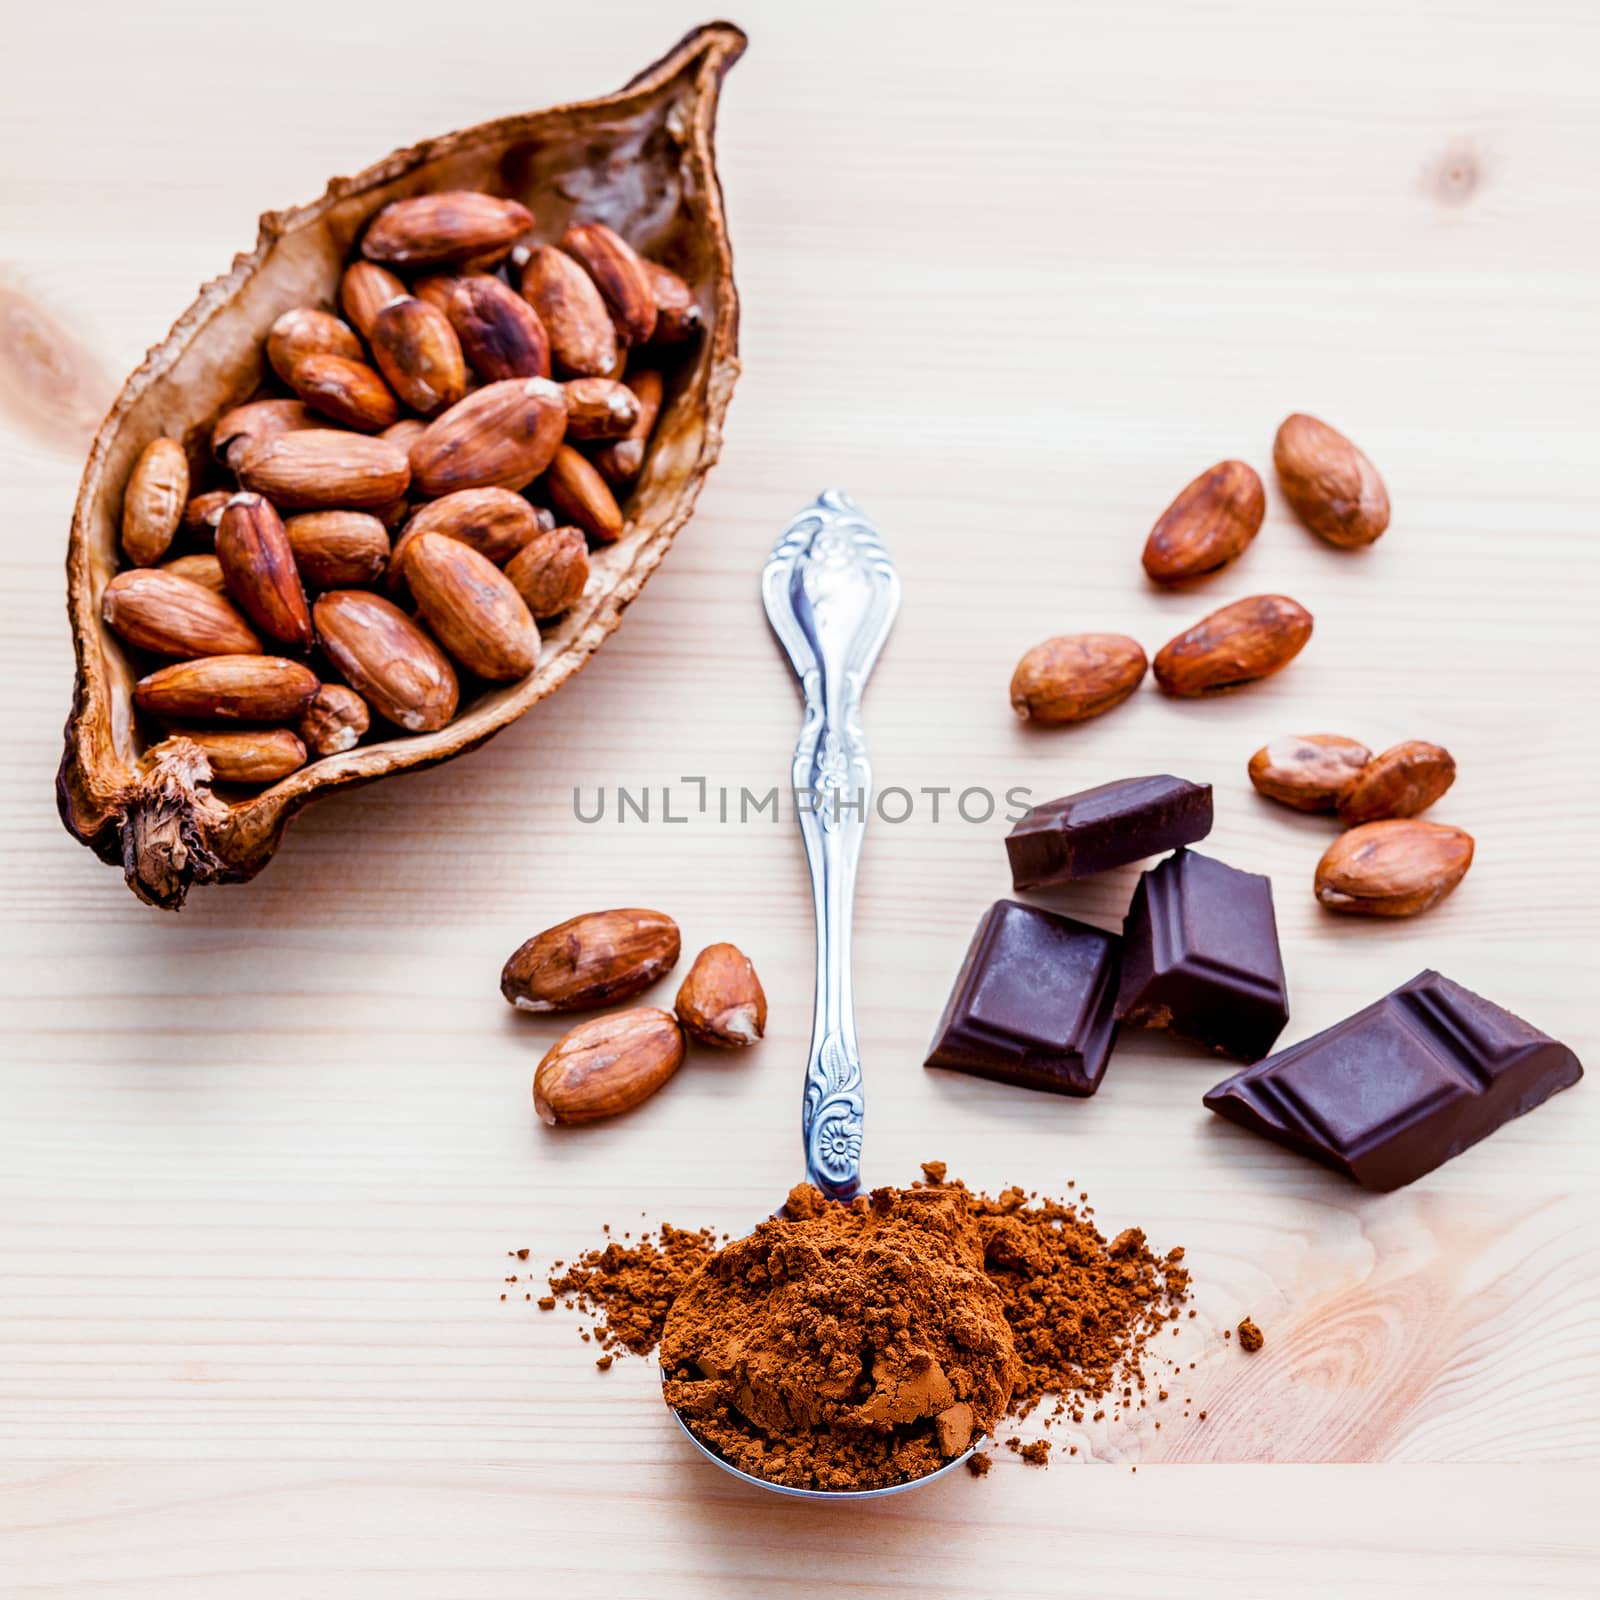 Brown chocolate powder in spoon , Roasted cocoa beans and dark chocolate setup on wooden background. Selective focus depth of field on chocolate powder.